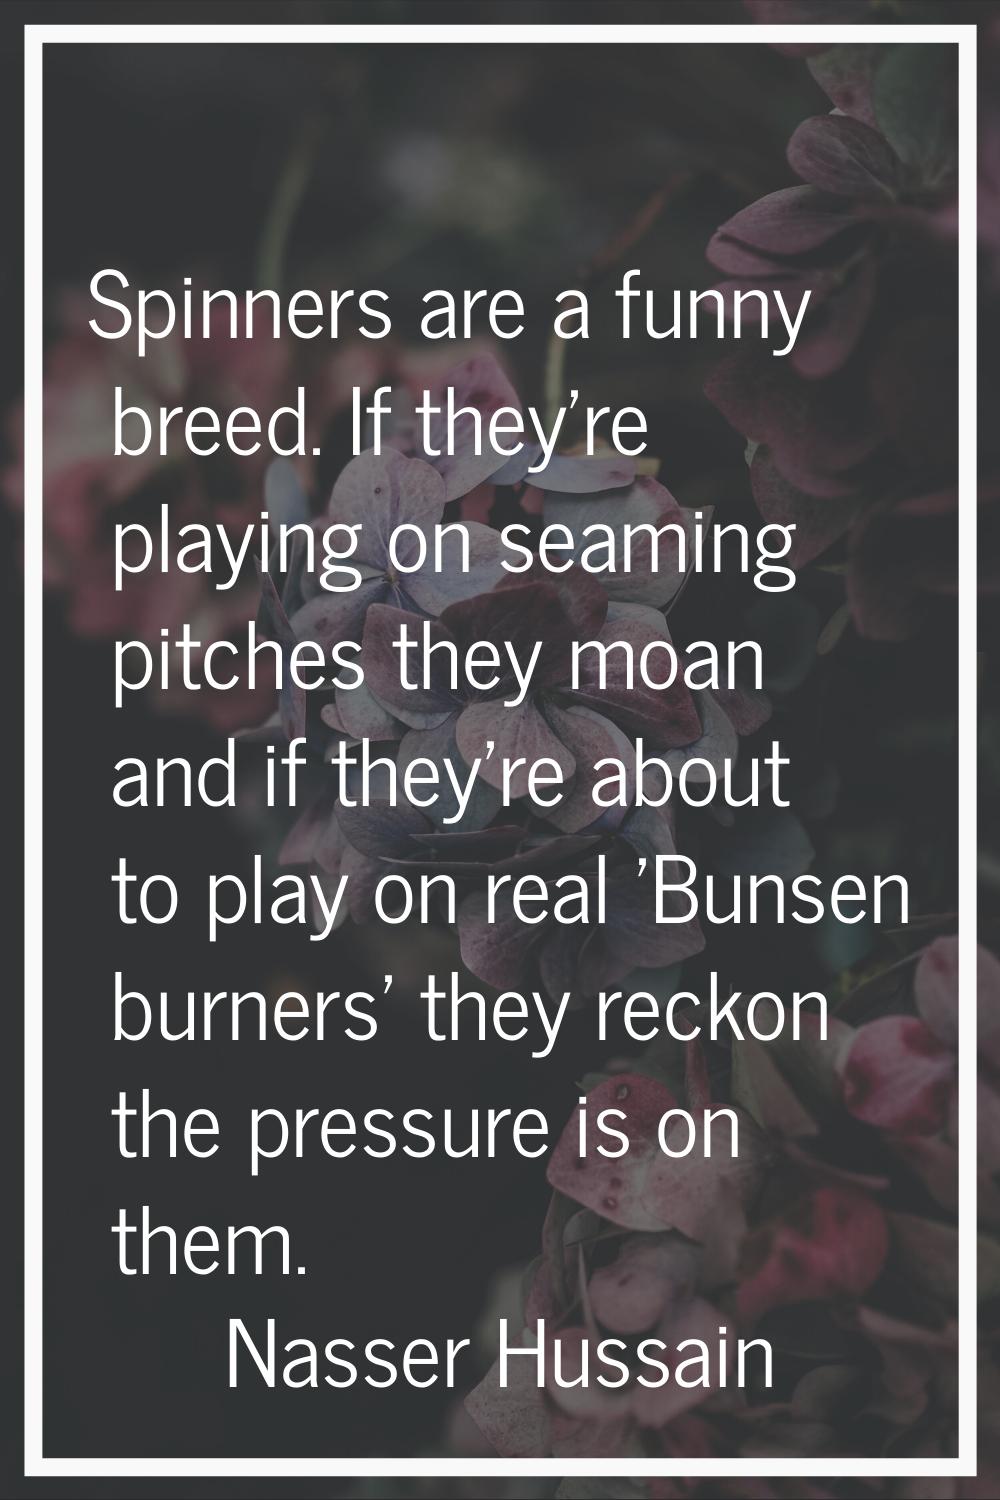 Spinners are a funny breed. If they're playing on seaming pitches they moan and if they're about to